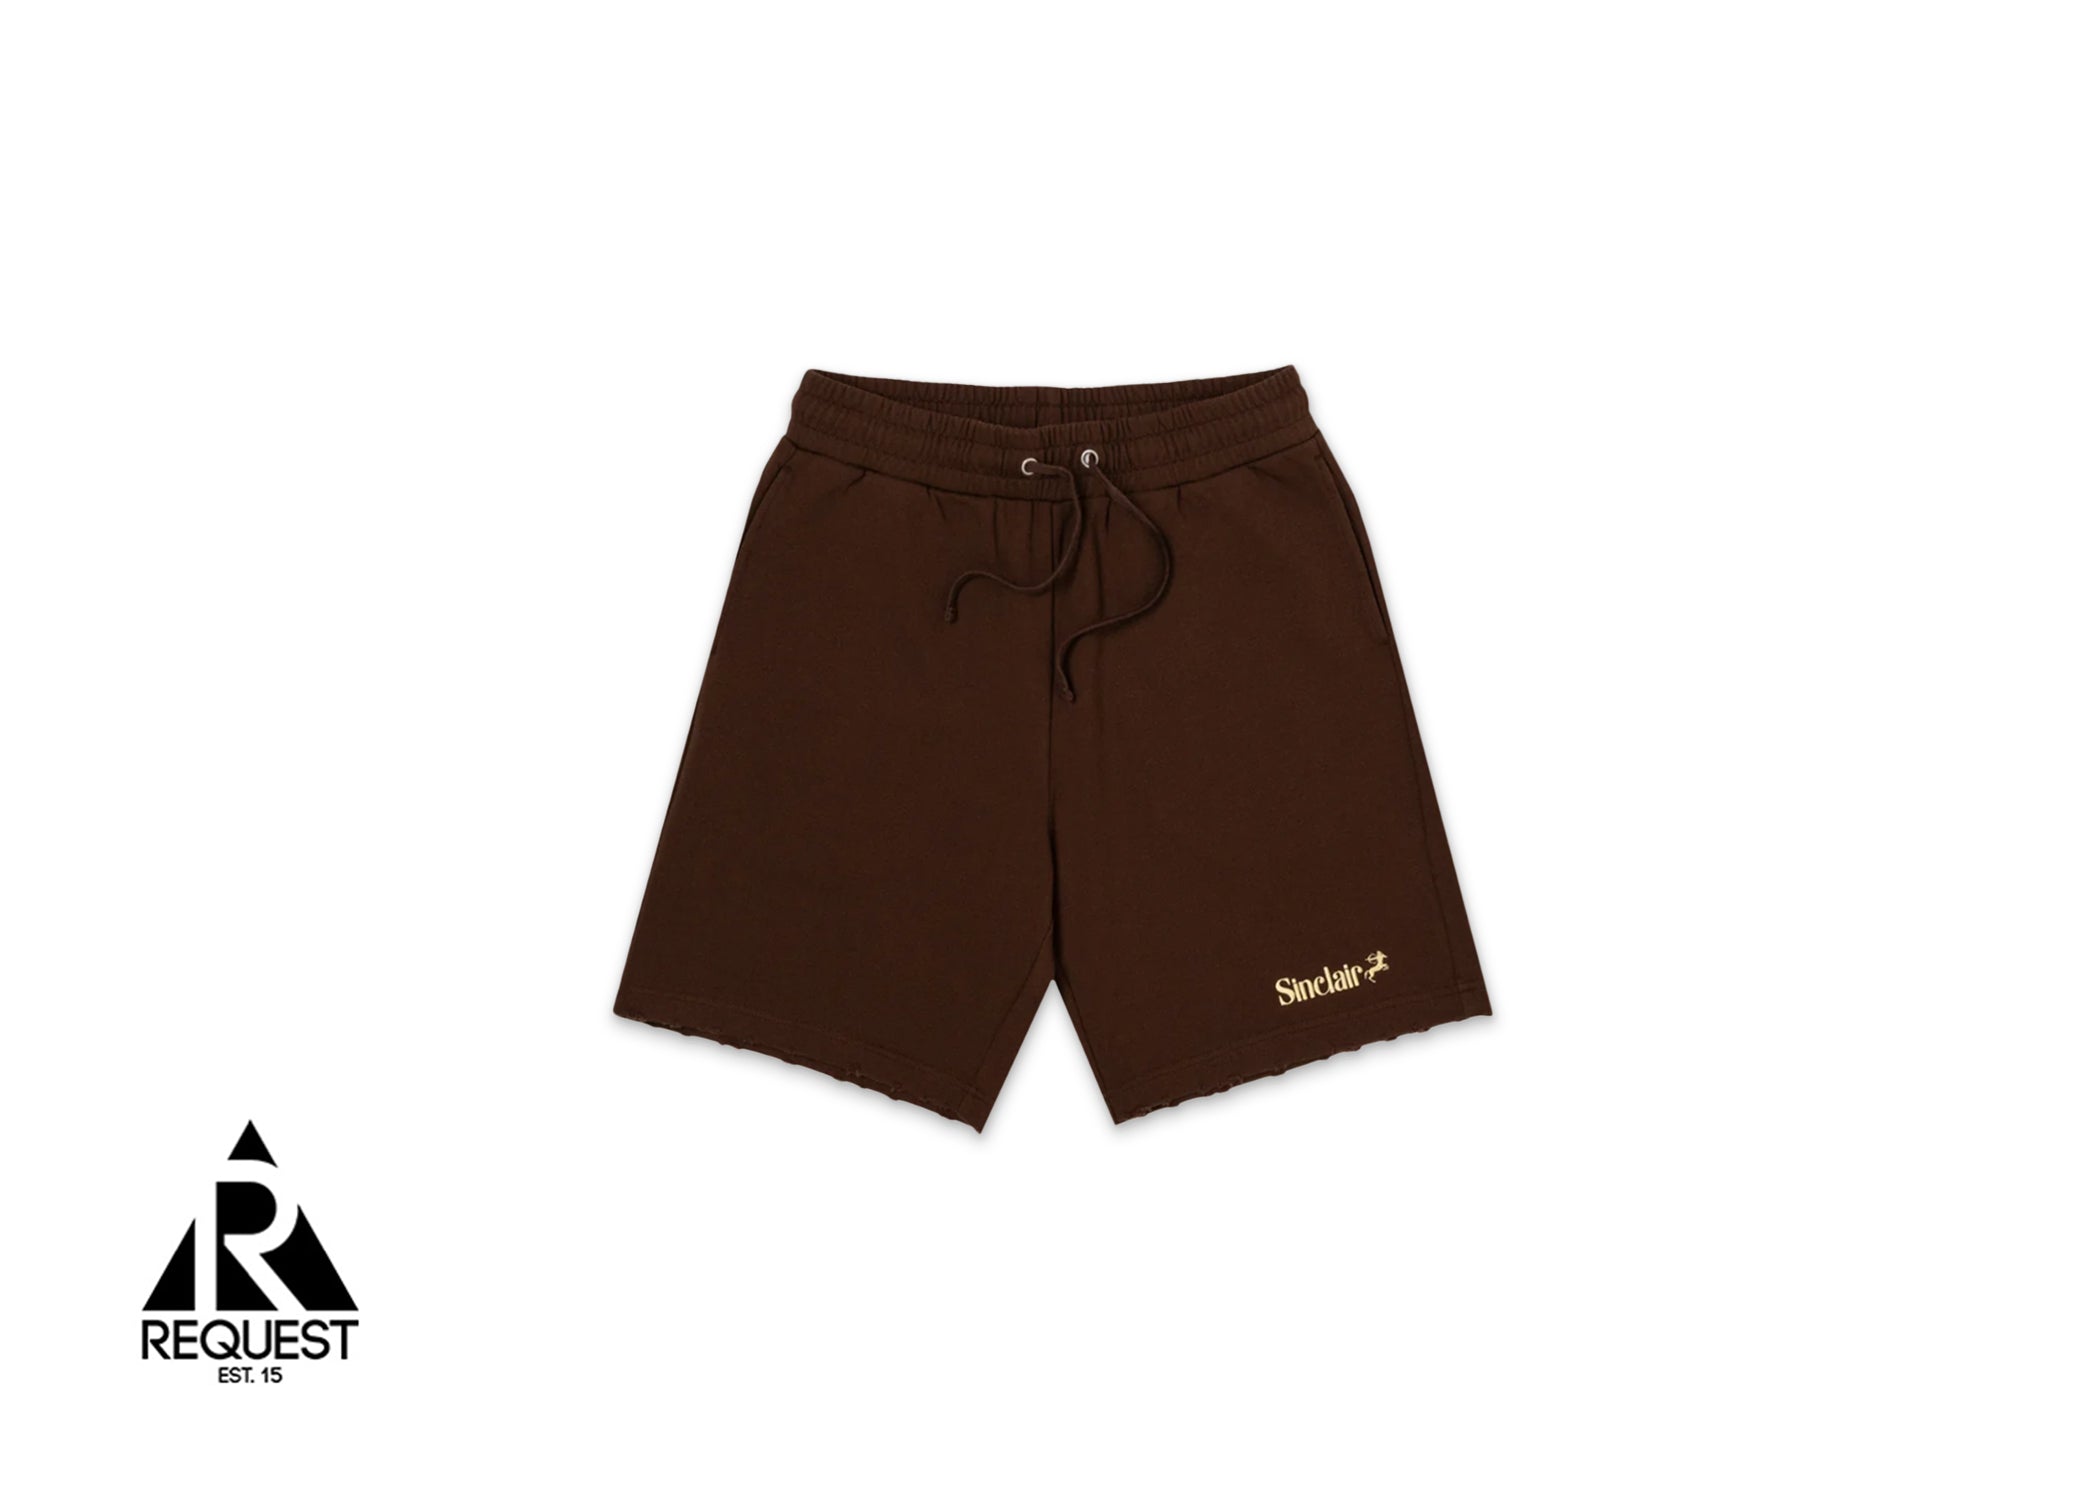 Sinclair French Terry Shorts "Brown"